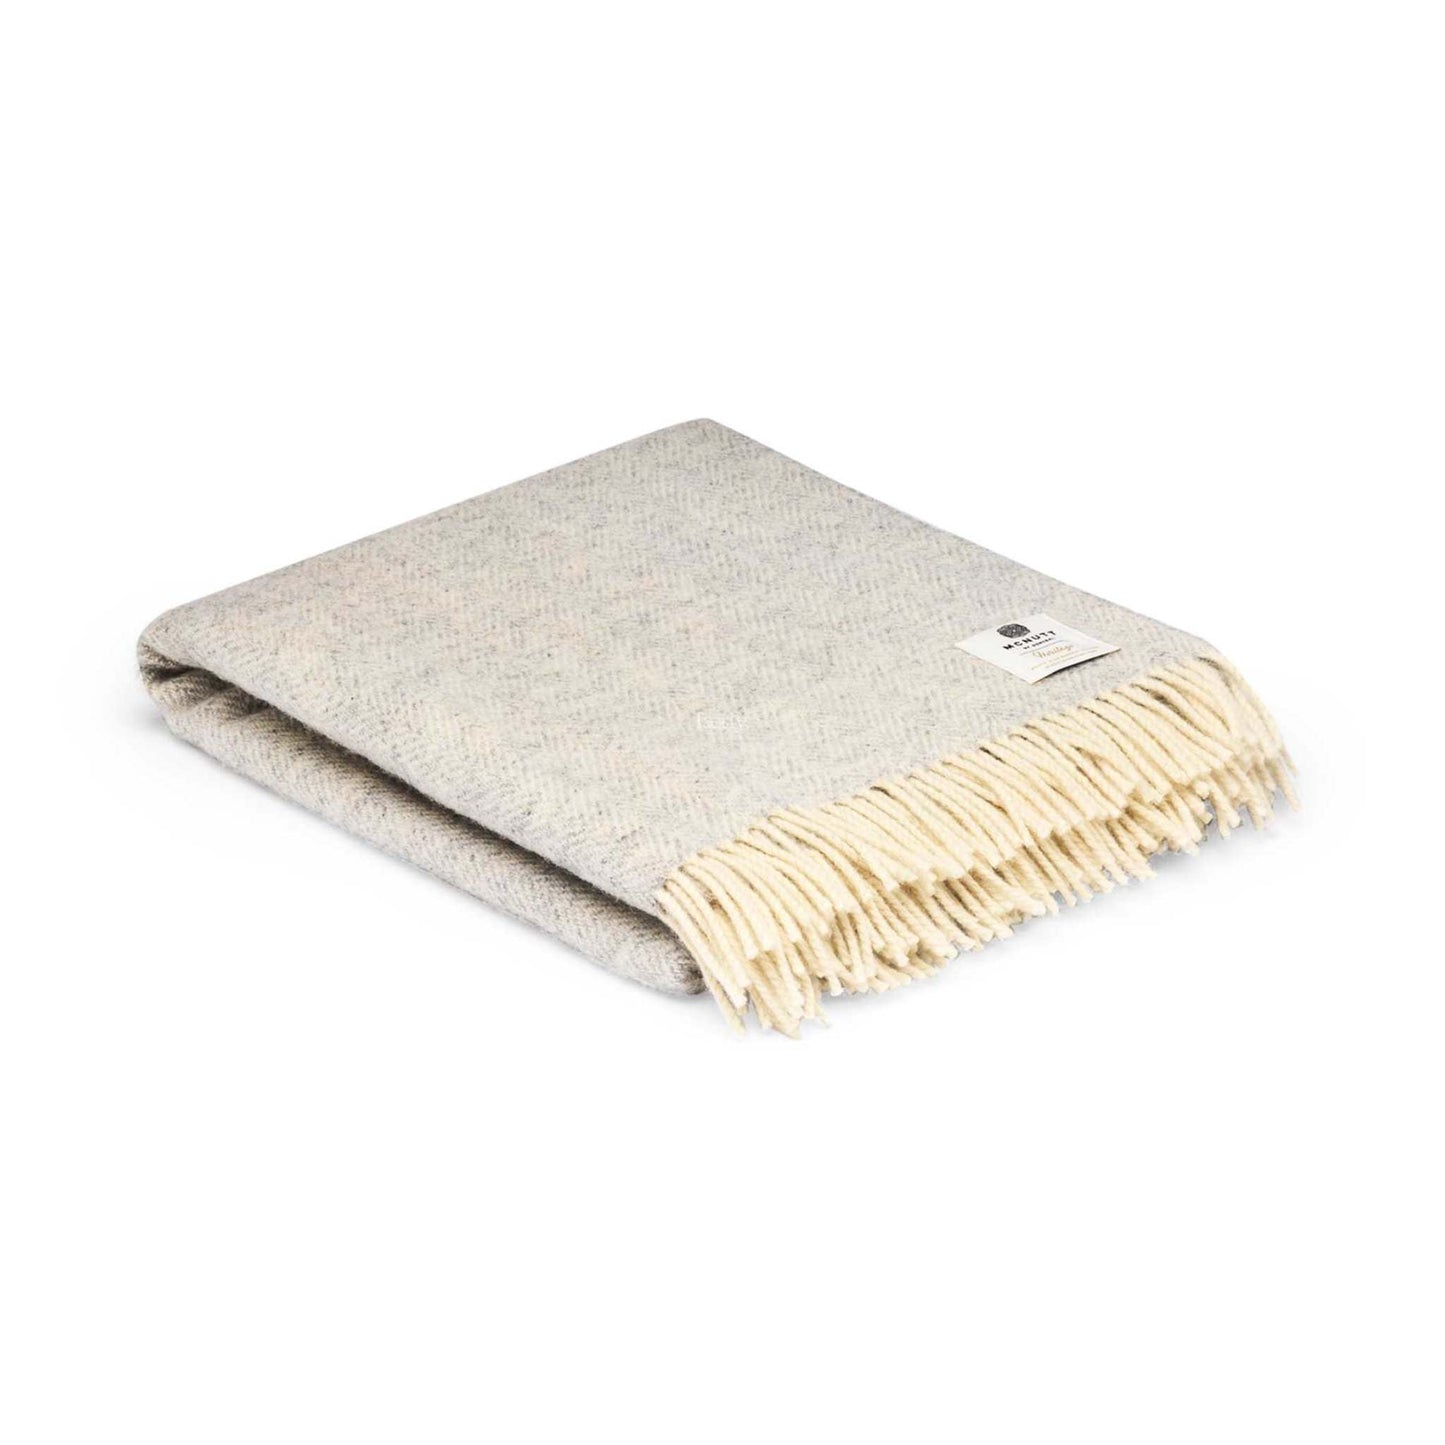 McNutt Blanket 100% Pure Wool Throw - Heritage Collection - Grey Cloud Herringbone - McNutts of Donegal